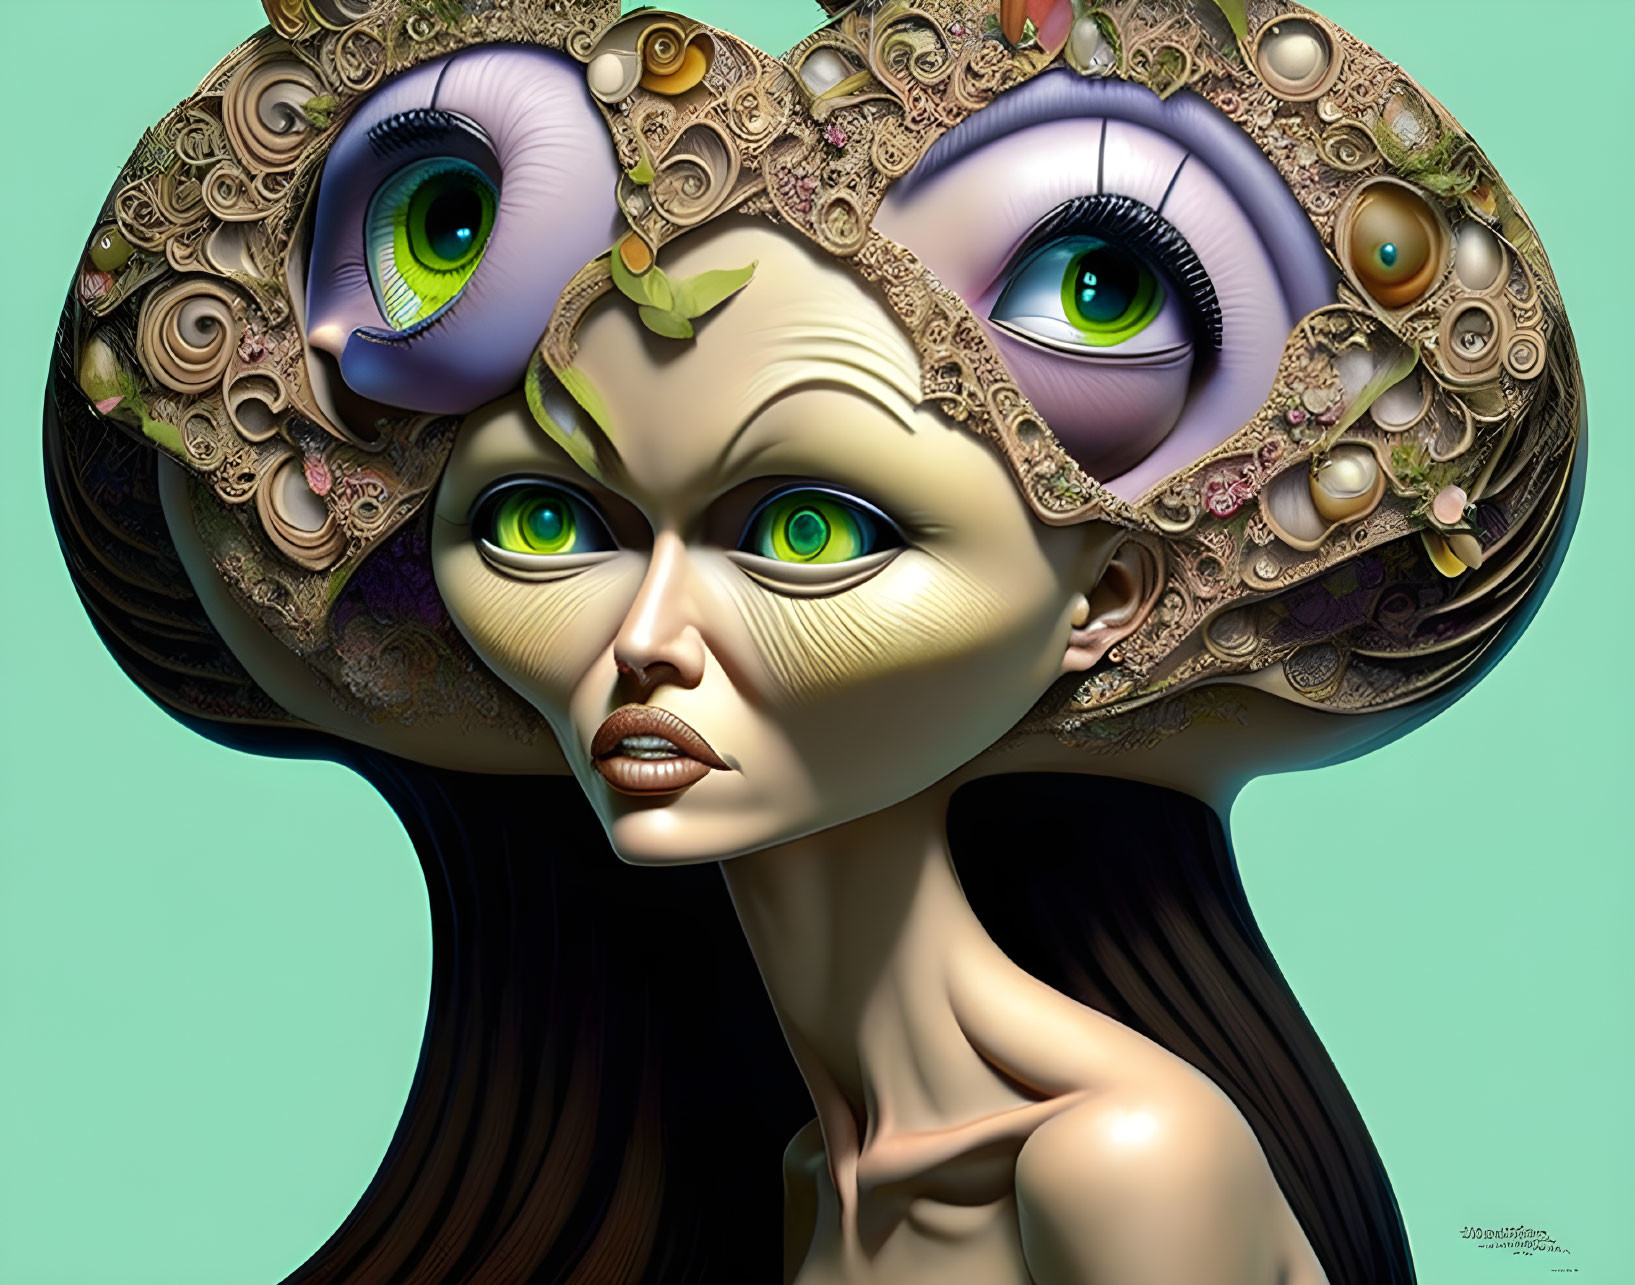 Surreal digital artwork: Woman with multiple eyes and brain-like head on teal background